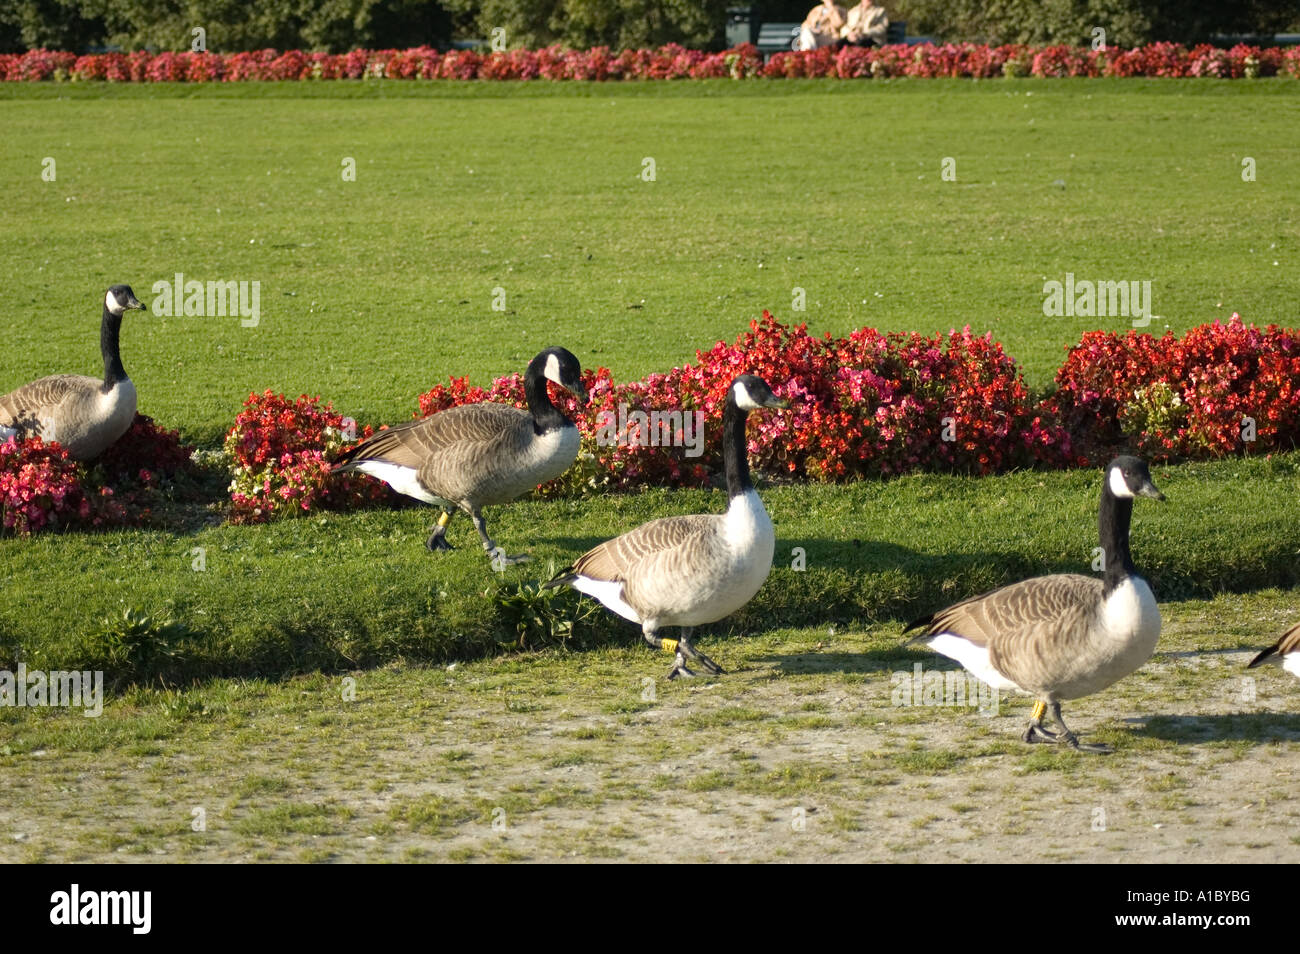 several geese in park Stock Photo